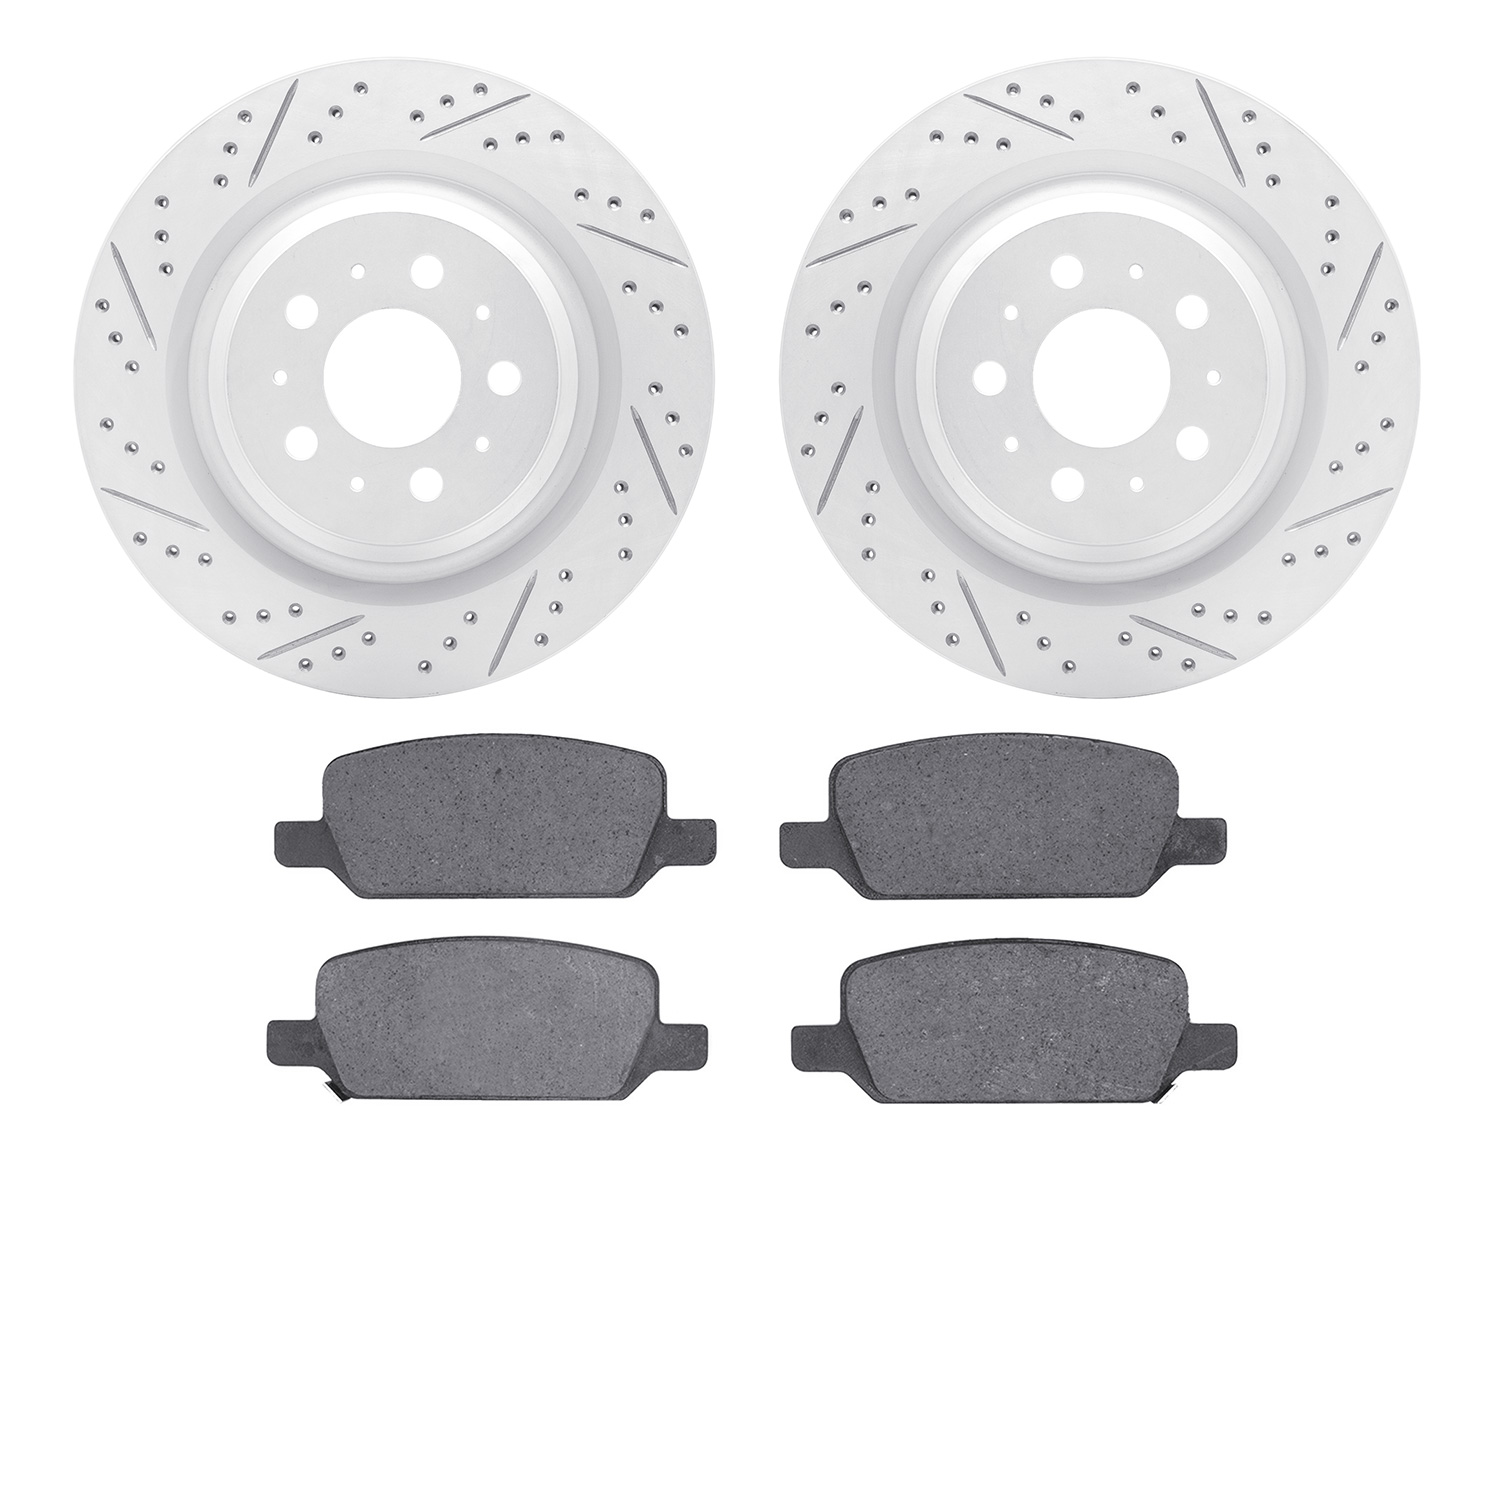 2502-26007 Geoperformance Drilled/Slotted Rotors w/5000 Advanced Brake Pads Kit, Fits Select Tesla, Position: Rear